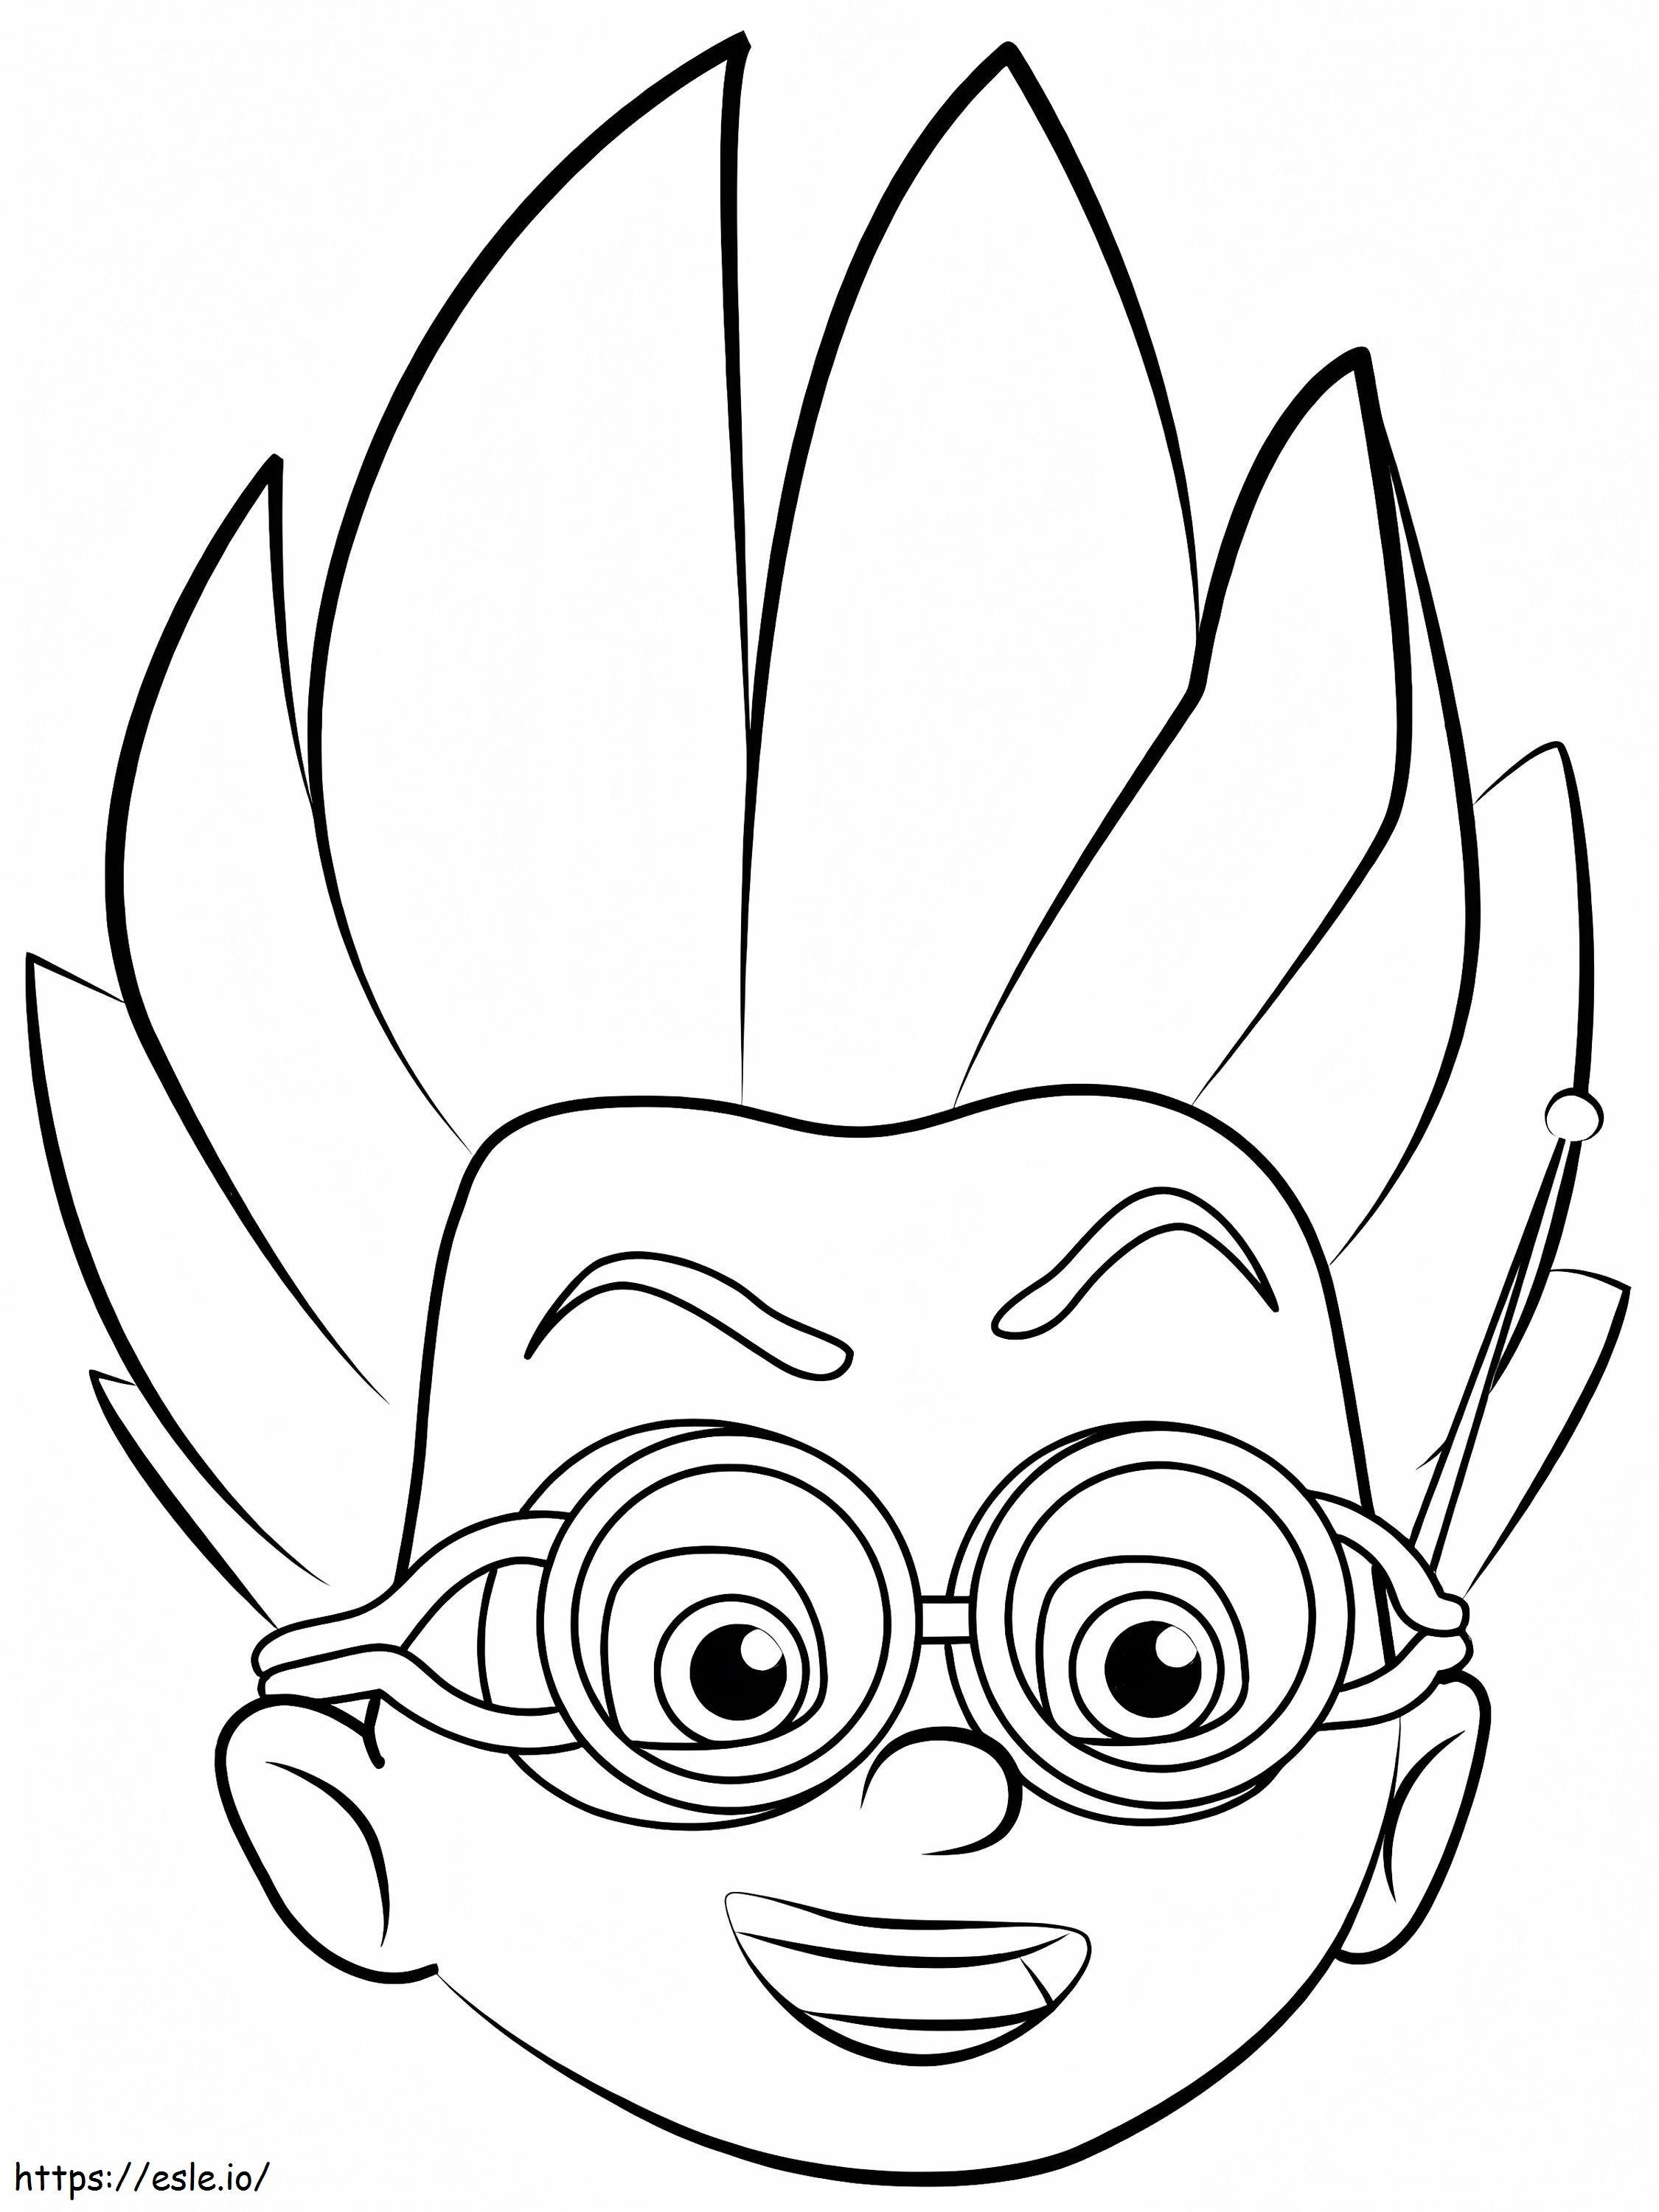 Romeo From PJ Masks coloring page